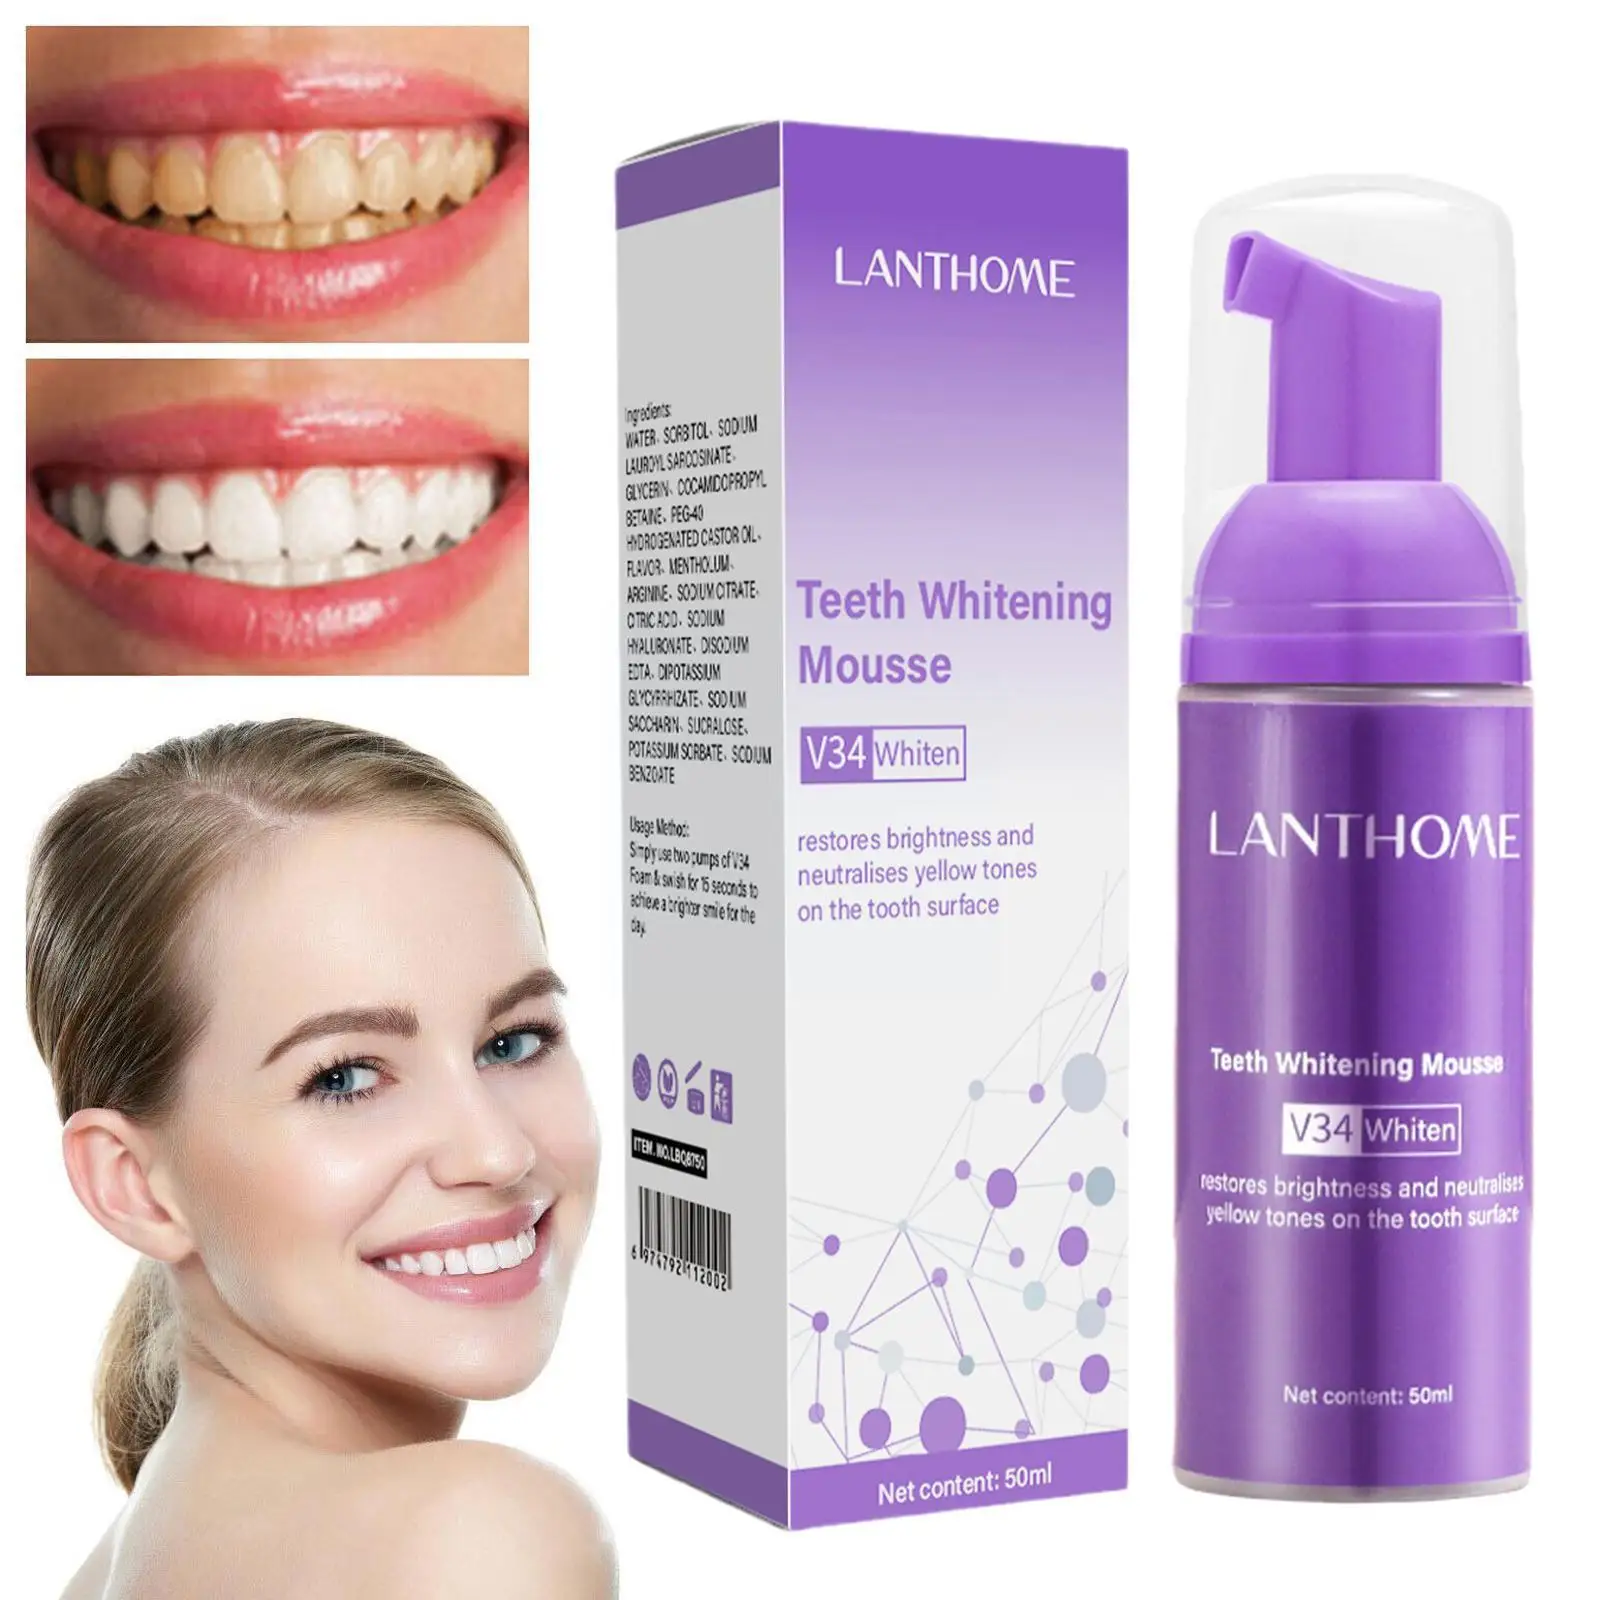 

V34 Tooth Whitening Mousse Deep Cleaning Effective Fresh Hygiene Toothpaste Mousse Stain Breath Remove Plaque Yellow Smoke W2K1